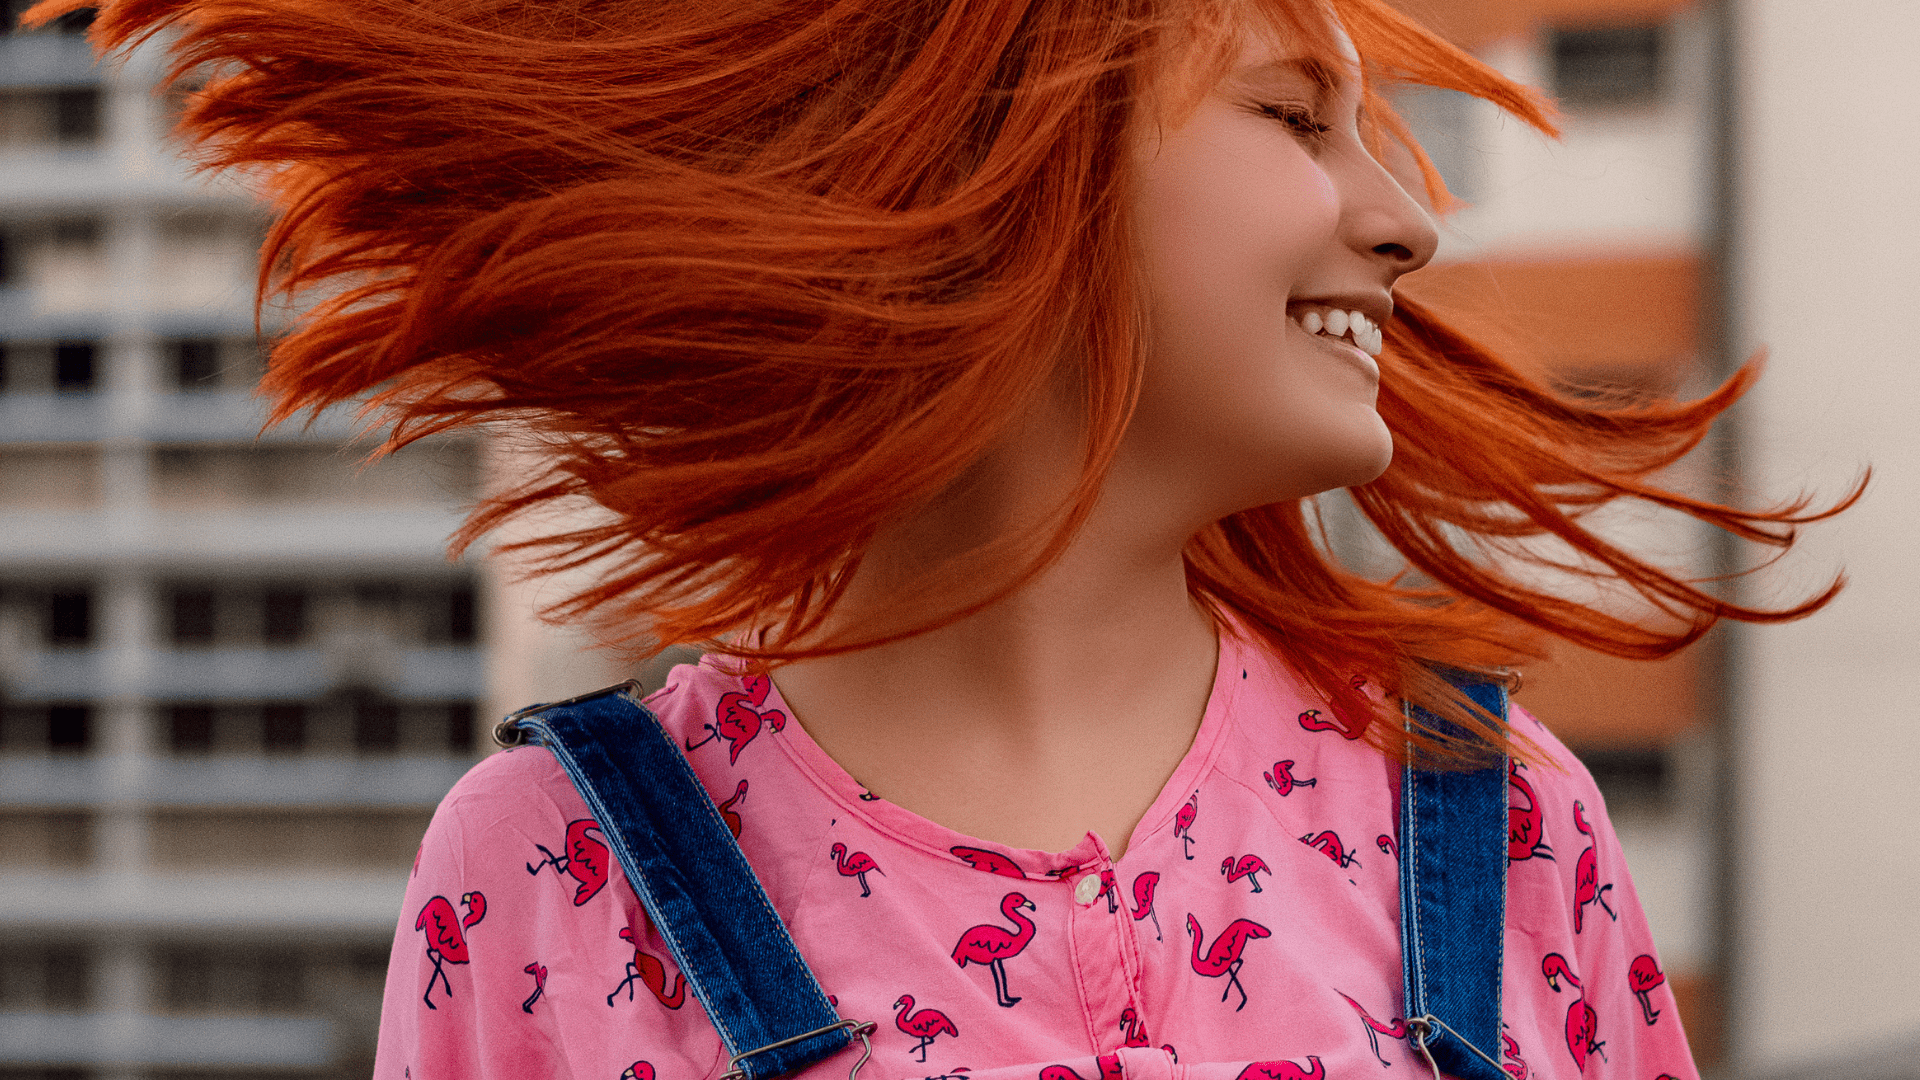 7 Things to Say to Empower a Redhead